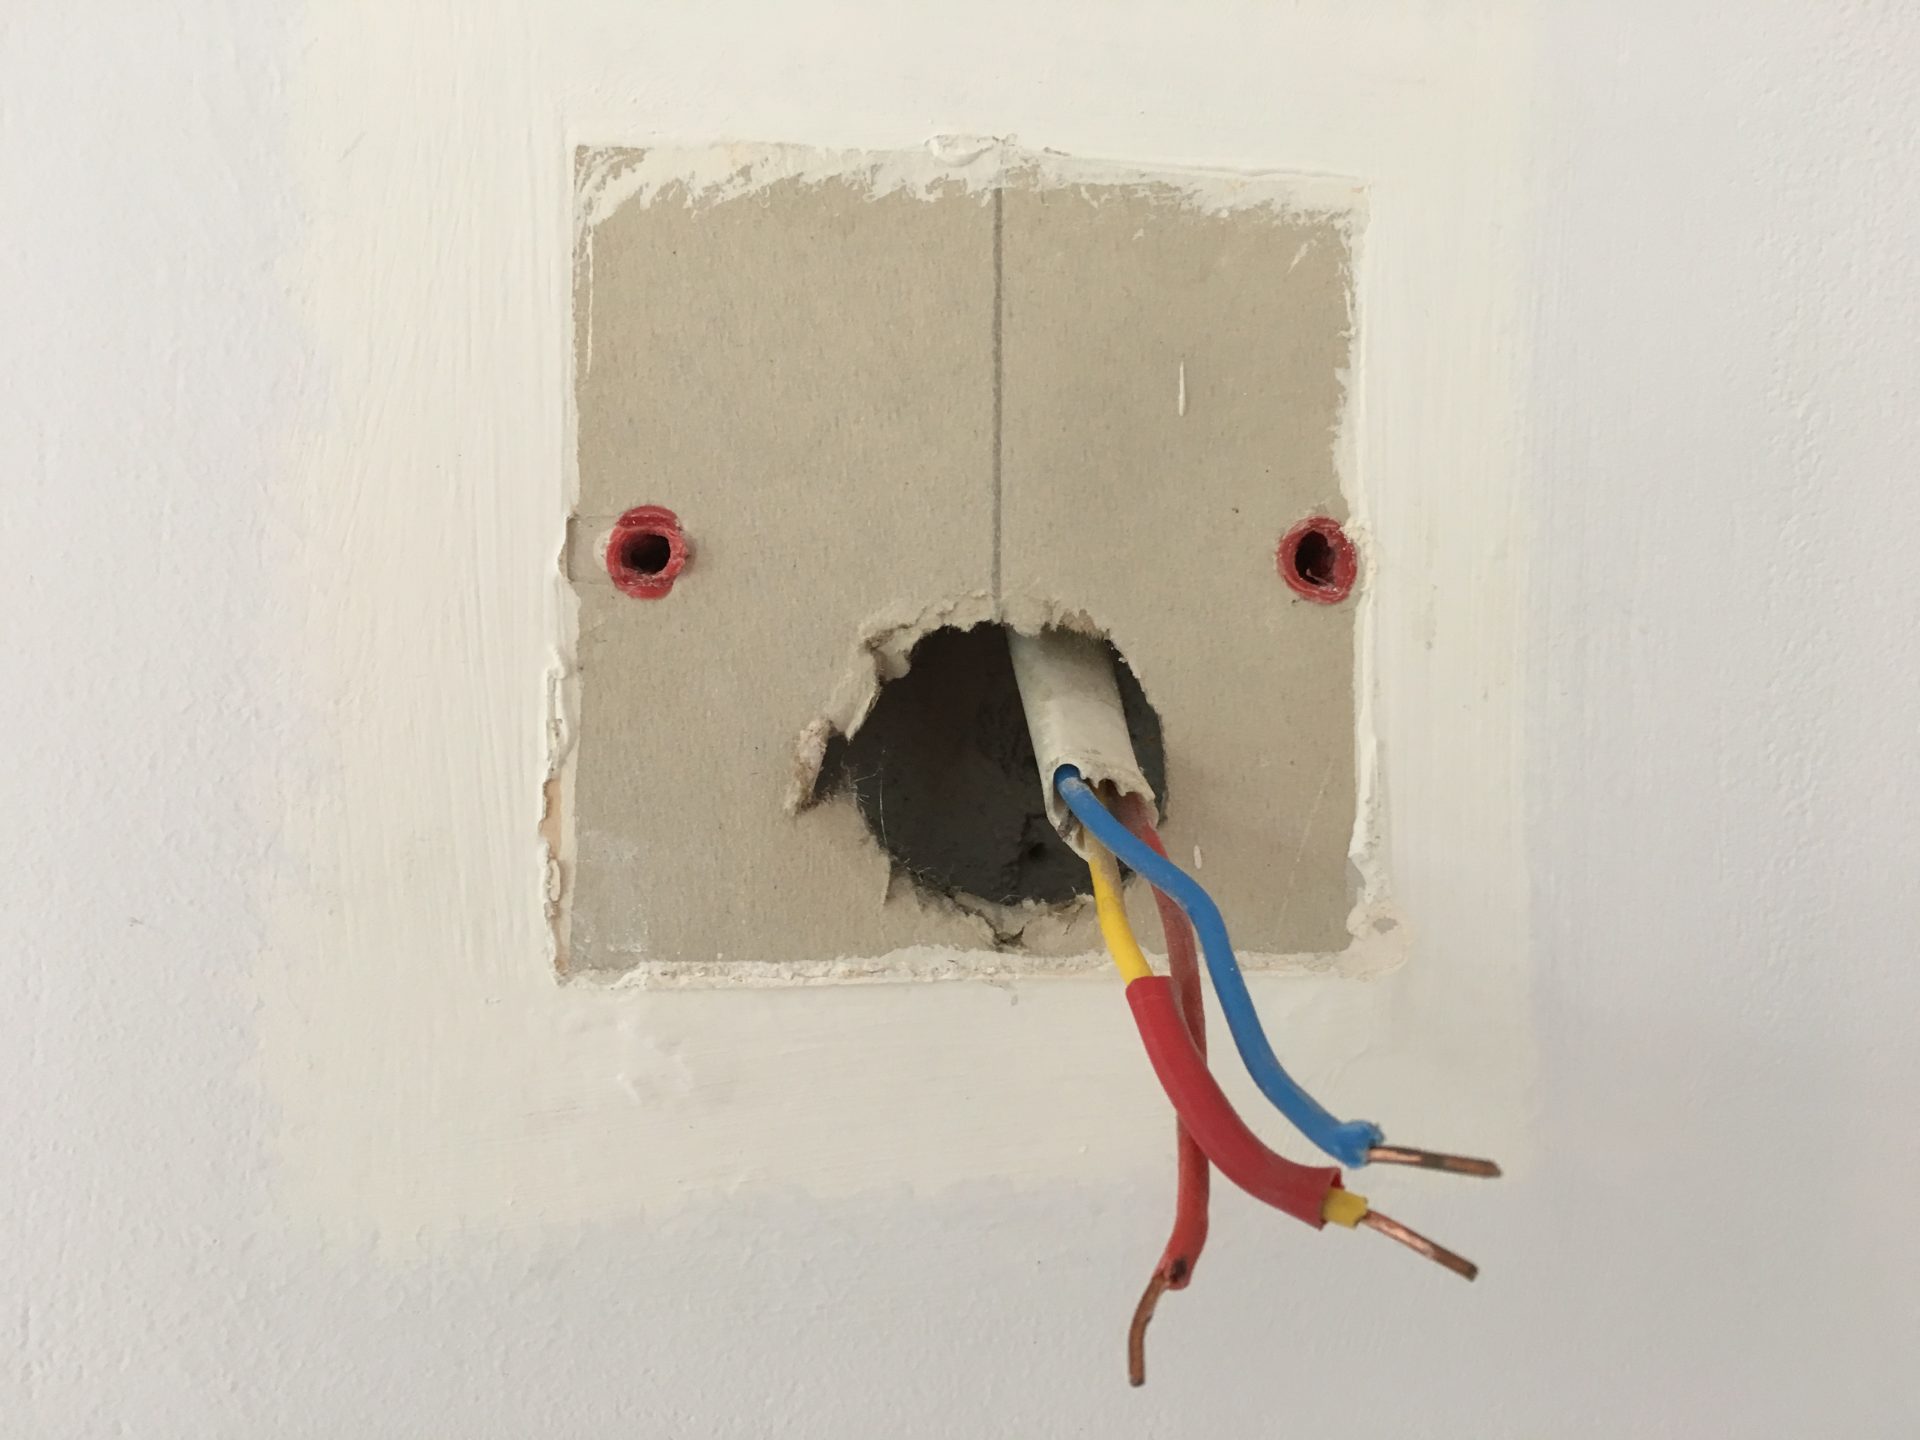 Old thermostat wiring